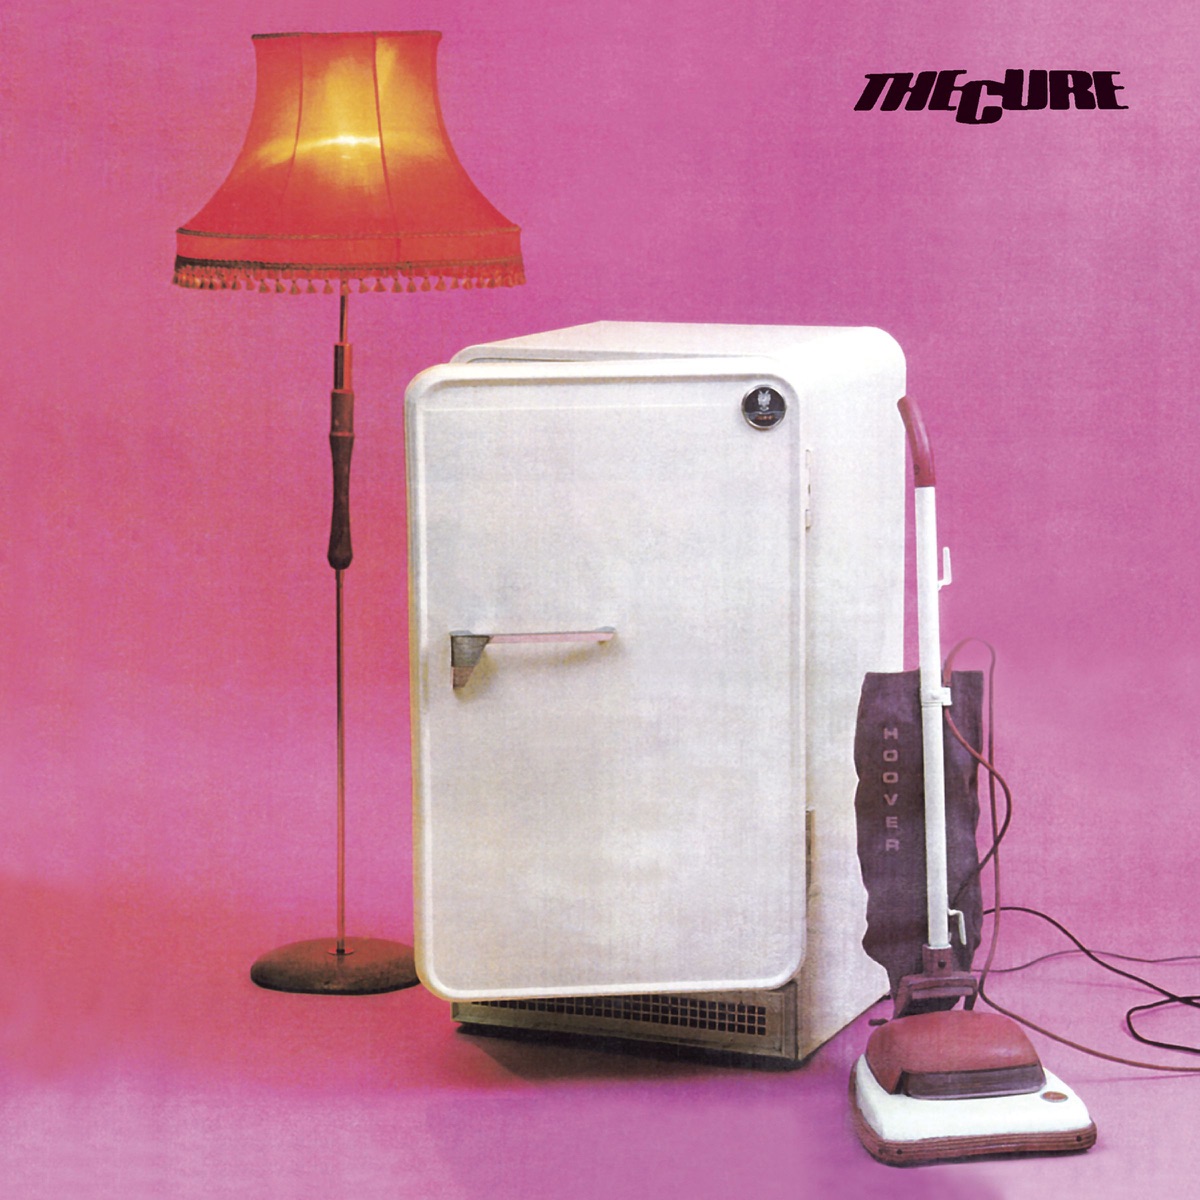 45 years ago today, #theCure released debut album “Three Imaginary Boys” (@FictionRecords). Still best played at 10:15 on a Saturday night when you’re crying for yesterday. Read our @thecure live reviews from 2023: magnetmagazine.com/2023/07/04/liv… magnetmagazine.com/2023/06/01/liv…